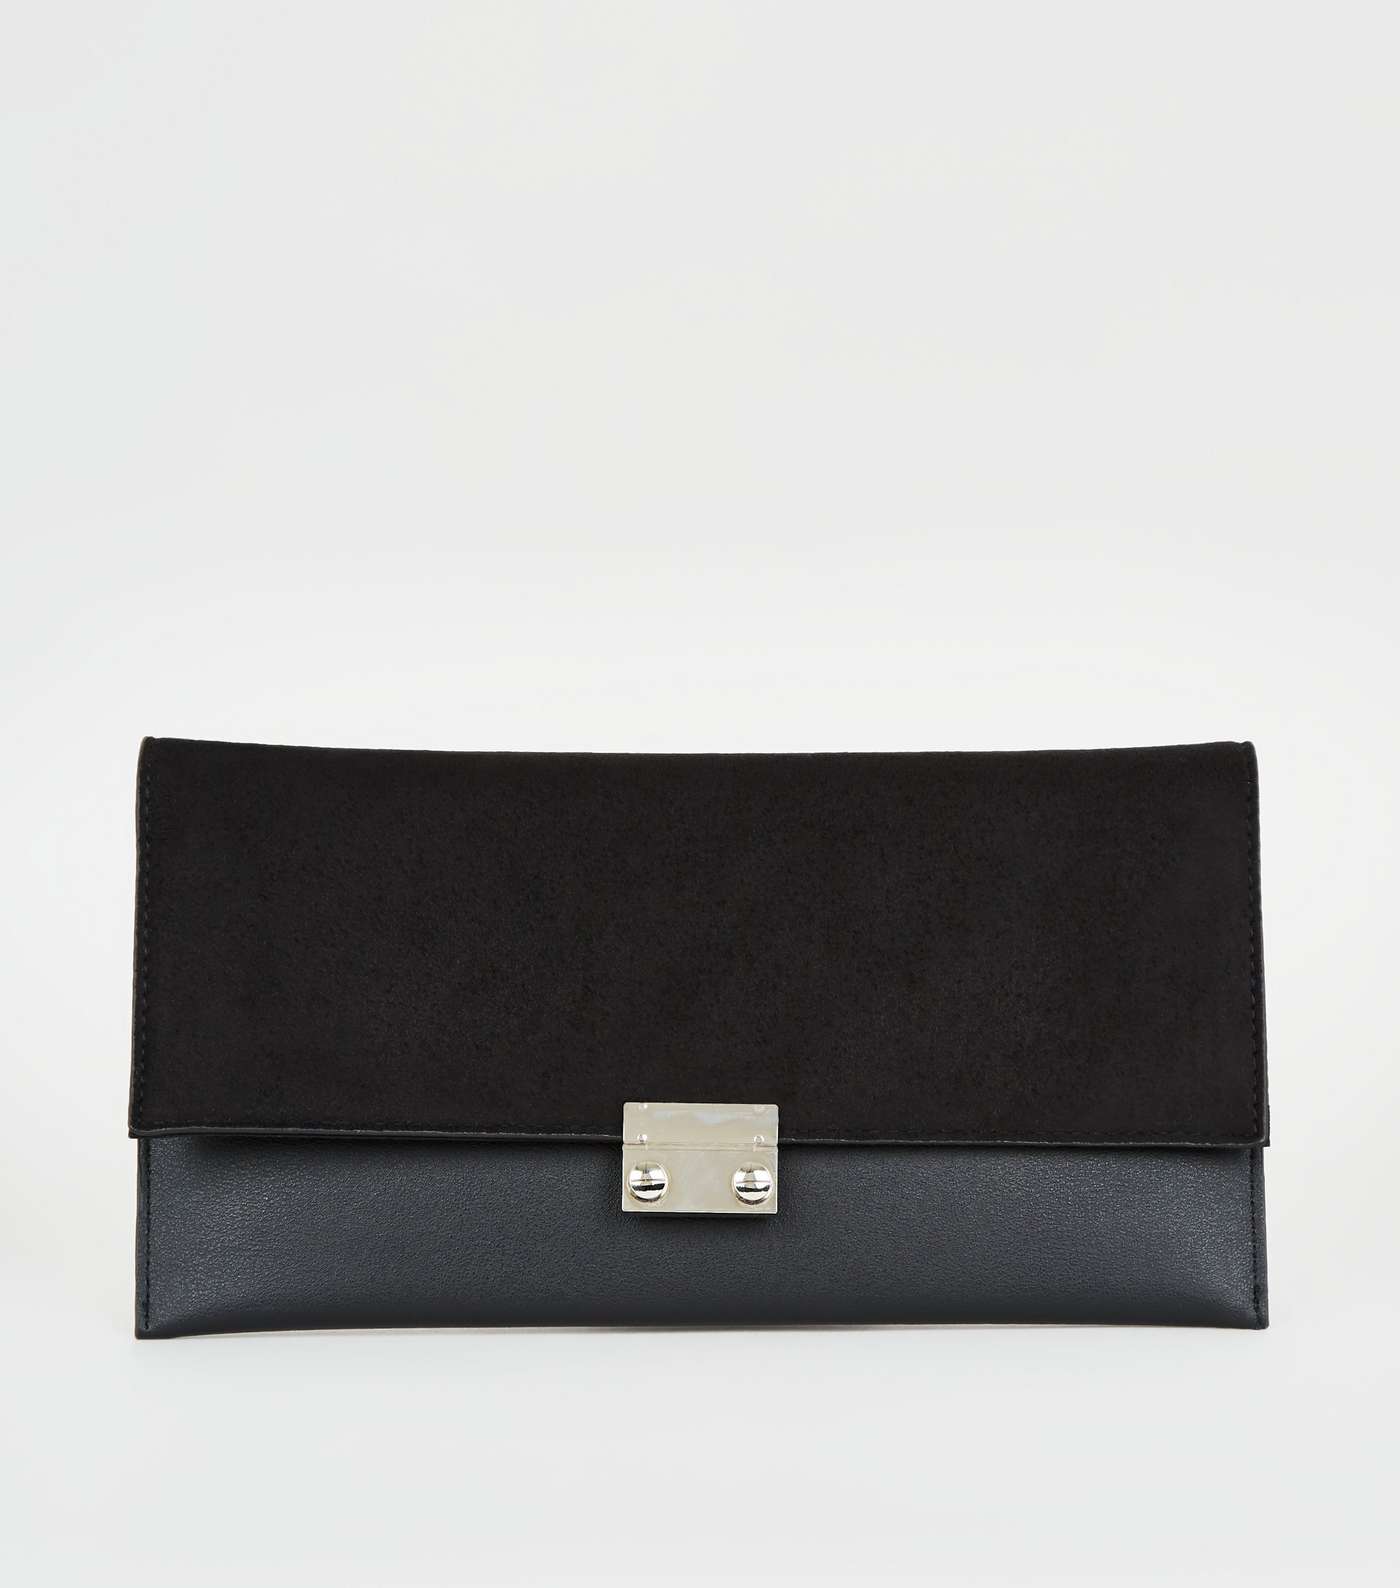 Black Leather-Look Suedette Clutch Bag